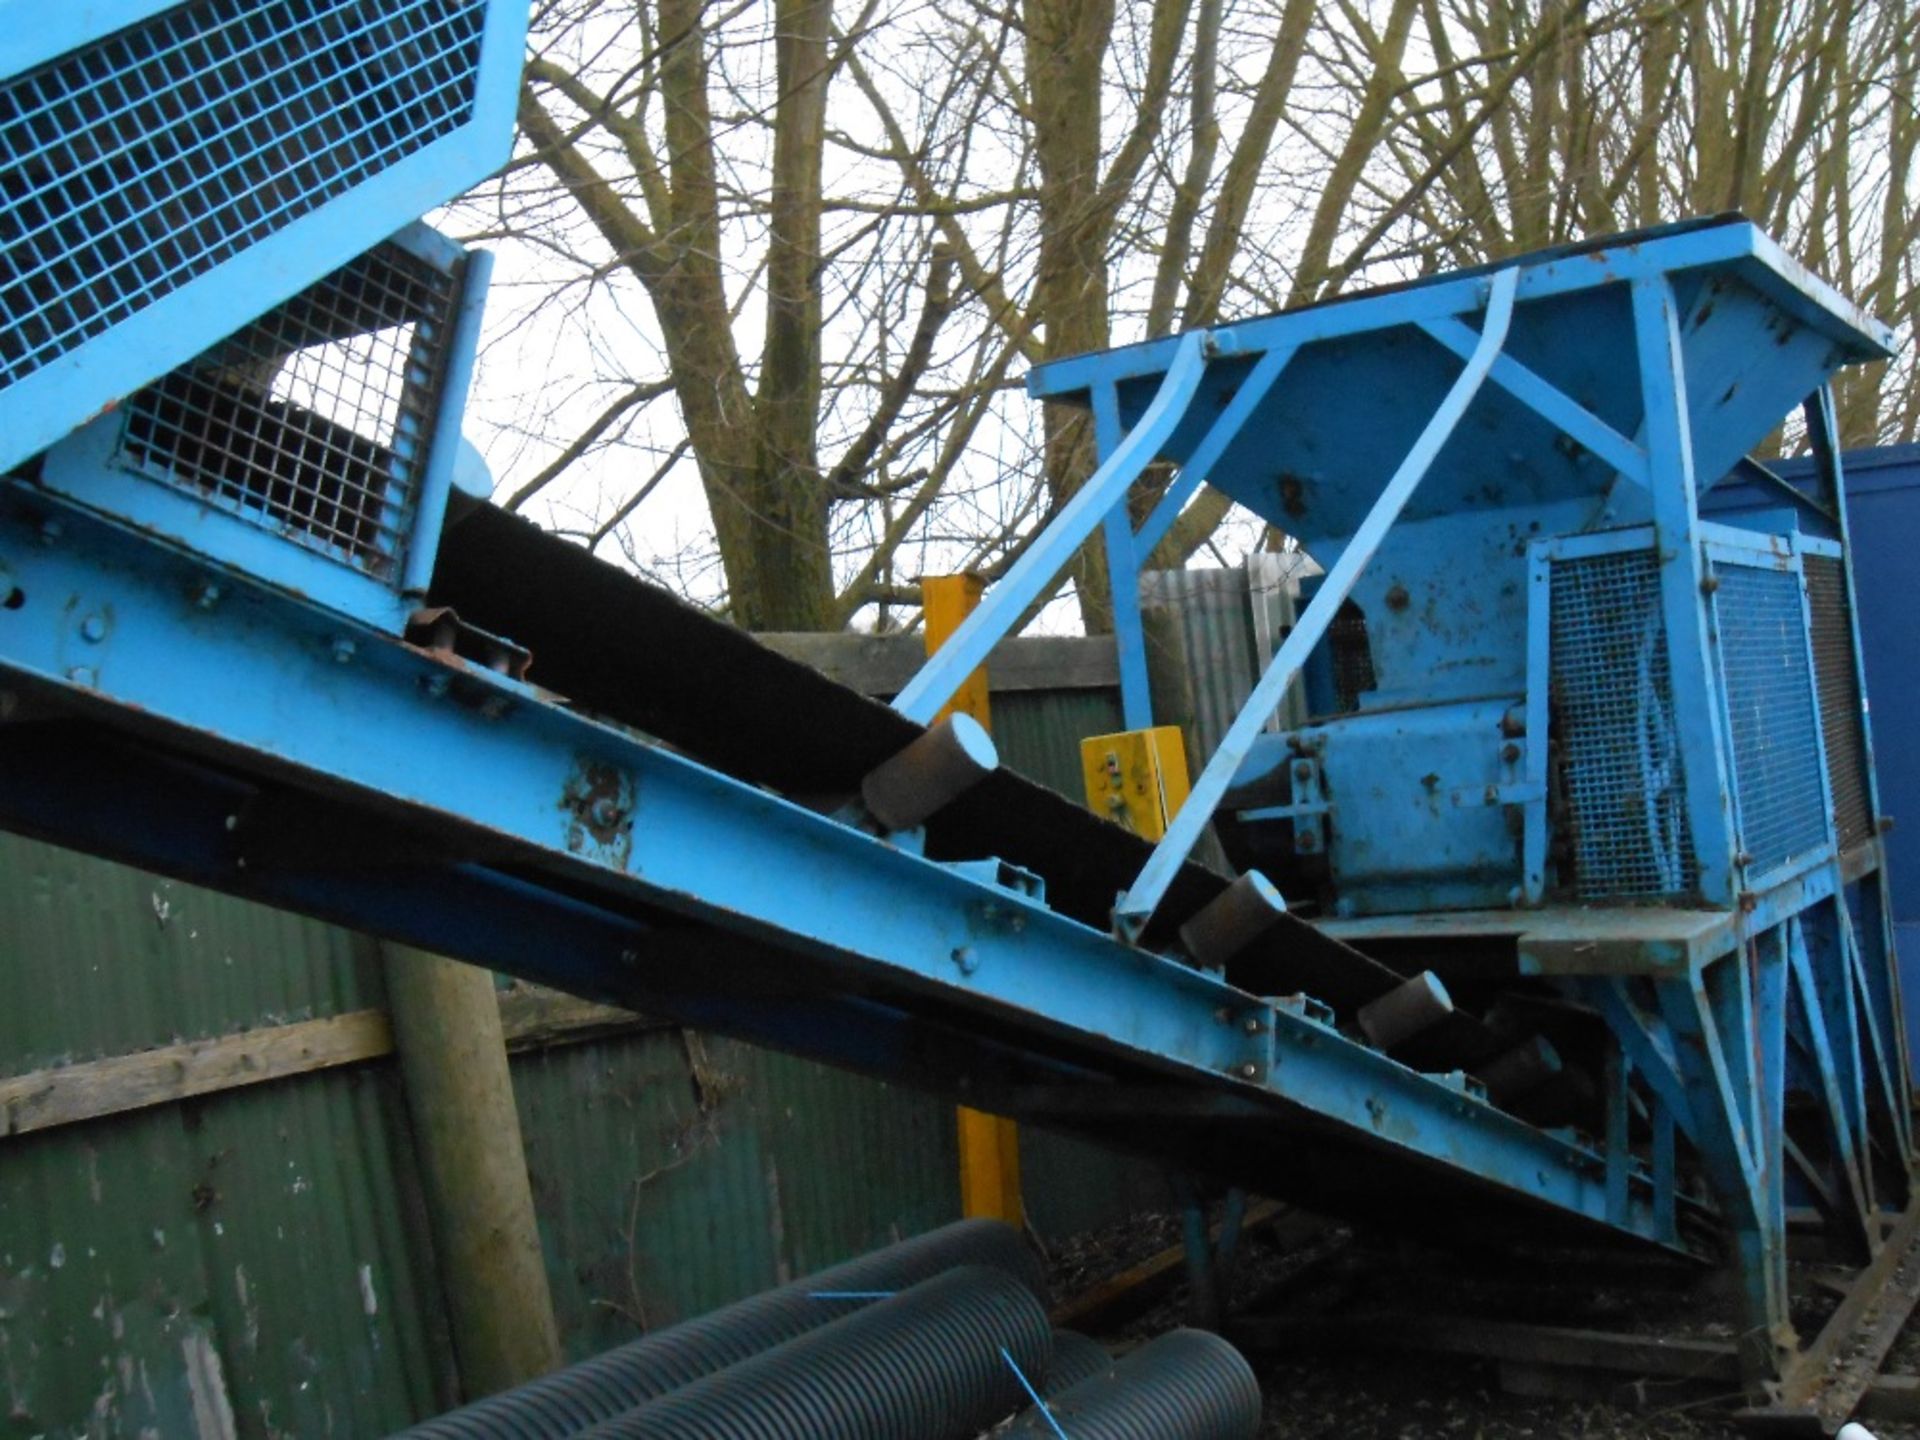 Electric powered 3 phase crusher rotary type, previously used in coal yard/mine.